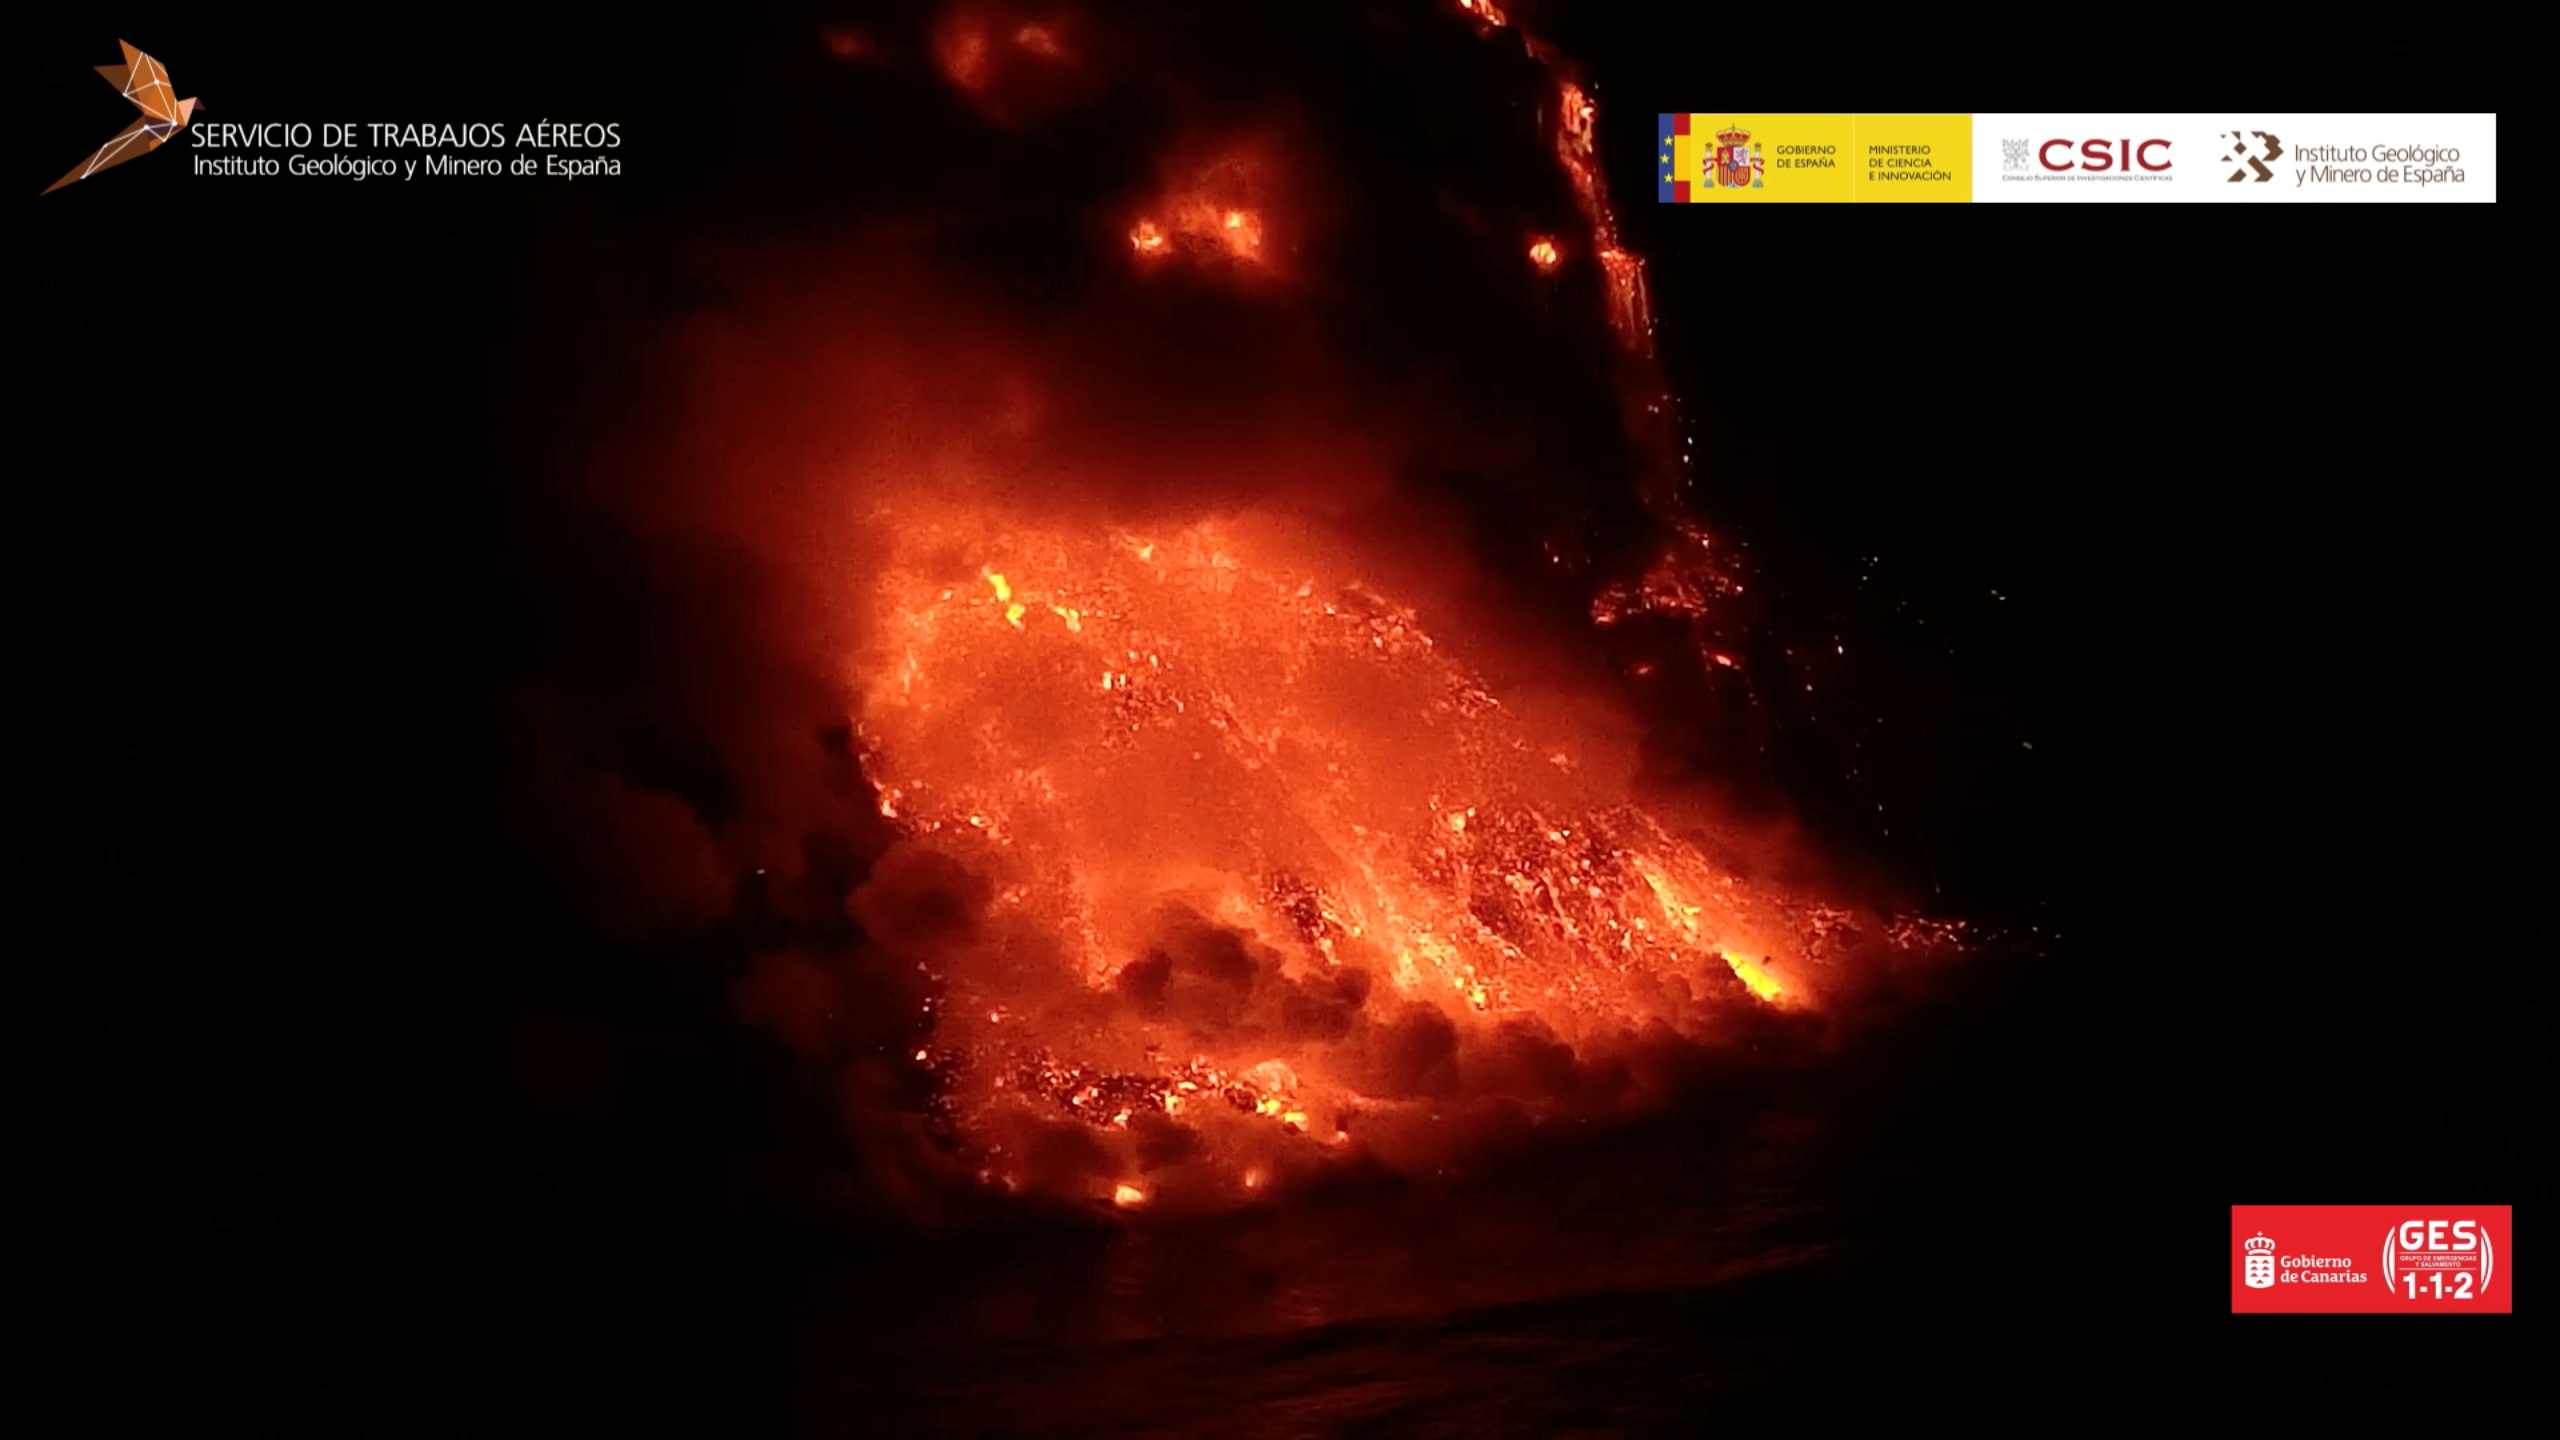 Steam rises as lava from the Cumbre Vieja volcano reaches the Atlantic Ocean off the island of La Palma, Spain, September 29, 2021, in this still image taken from video obtained from social media. Video taken September 29, 2021. Mandatory credit Geologico y Minero de Espana (CSIC)/via REUTERS ATTENTION EDITORS - THIS IMAGE HAS BEEN SUPPLIED BY A THIRD PARTY. MANDATORY CREDIT. NO RESALES. NO ARCHIVES. MUST NOT OBSCURE LOGO